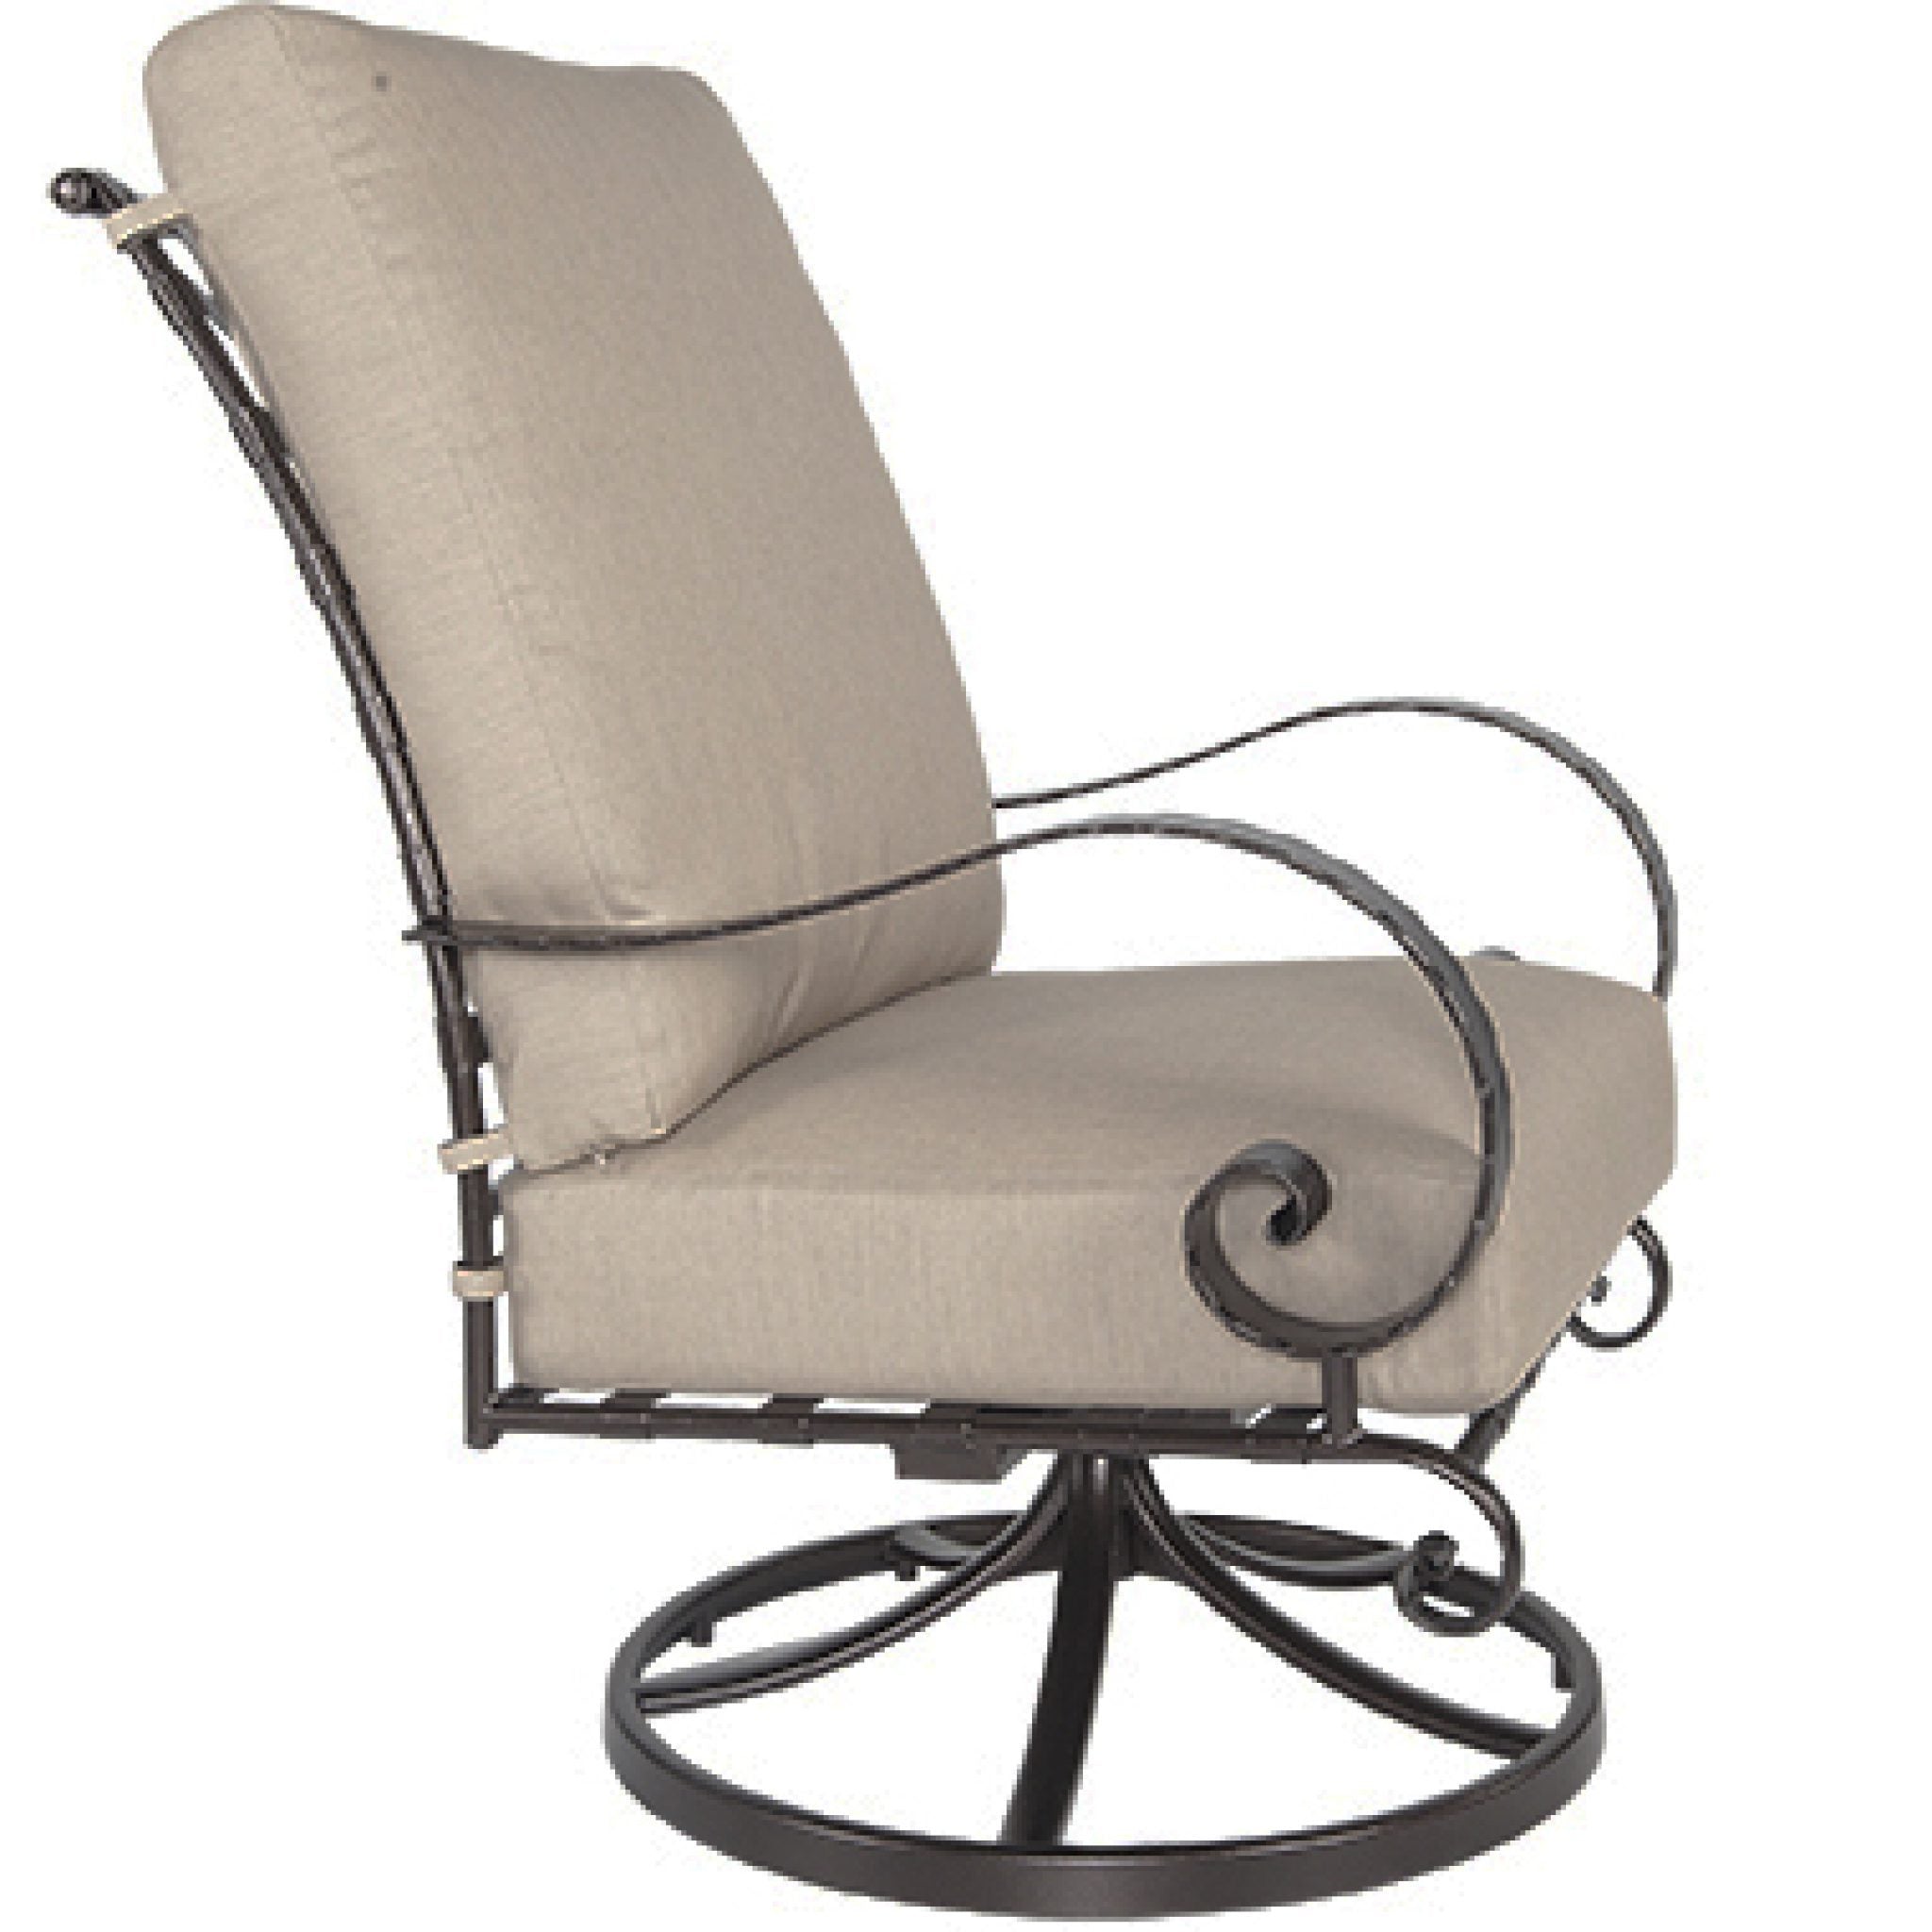 Classico High-Back Swivel Rocker Lounge Chair by Ow Lee